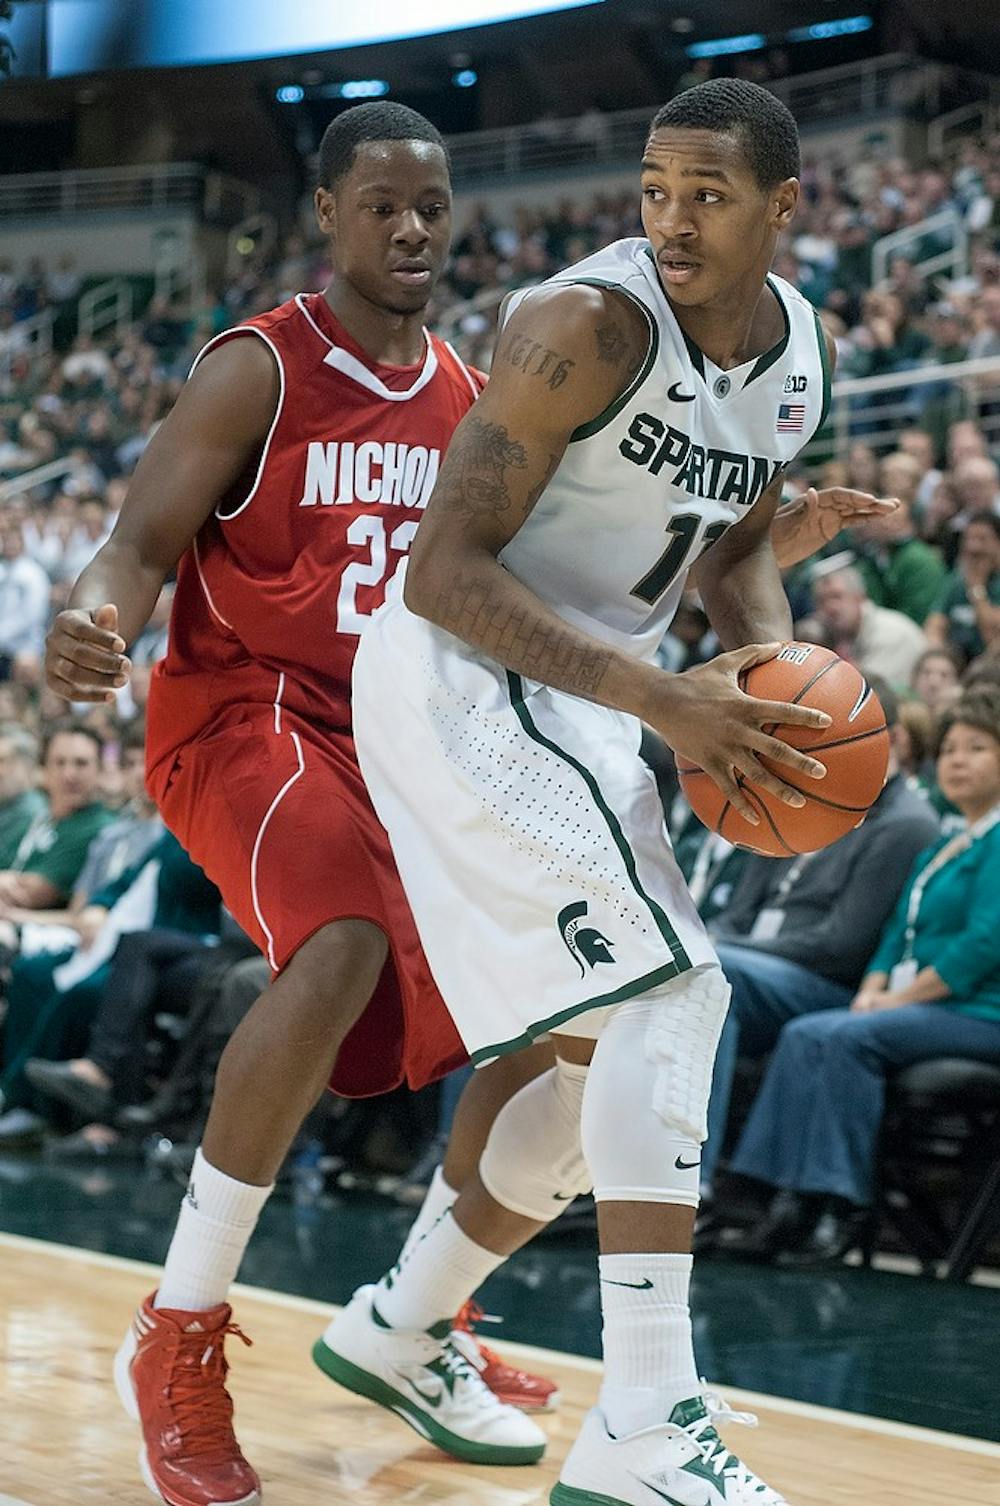 	<p>Junior guard Keith Appling looks to pass the ball during the game against Nicholls State on Dec. 1, 2012, at Breslin Center. Appling was the leading scorer for the Spartans with a total of 13 points, helping them beat the Colonels 84-39. Natalie Kolb/The State News</p>